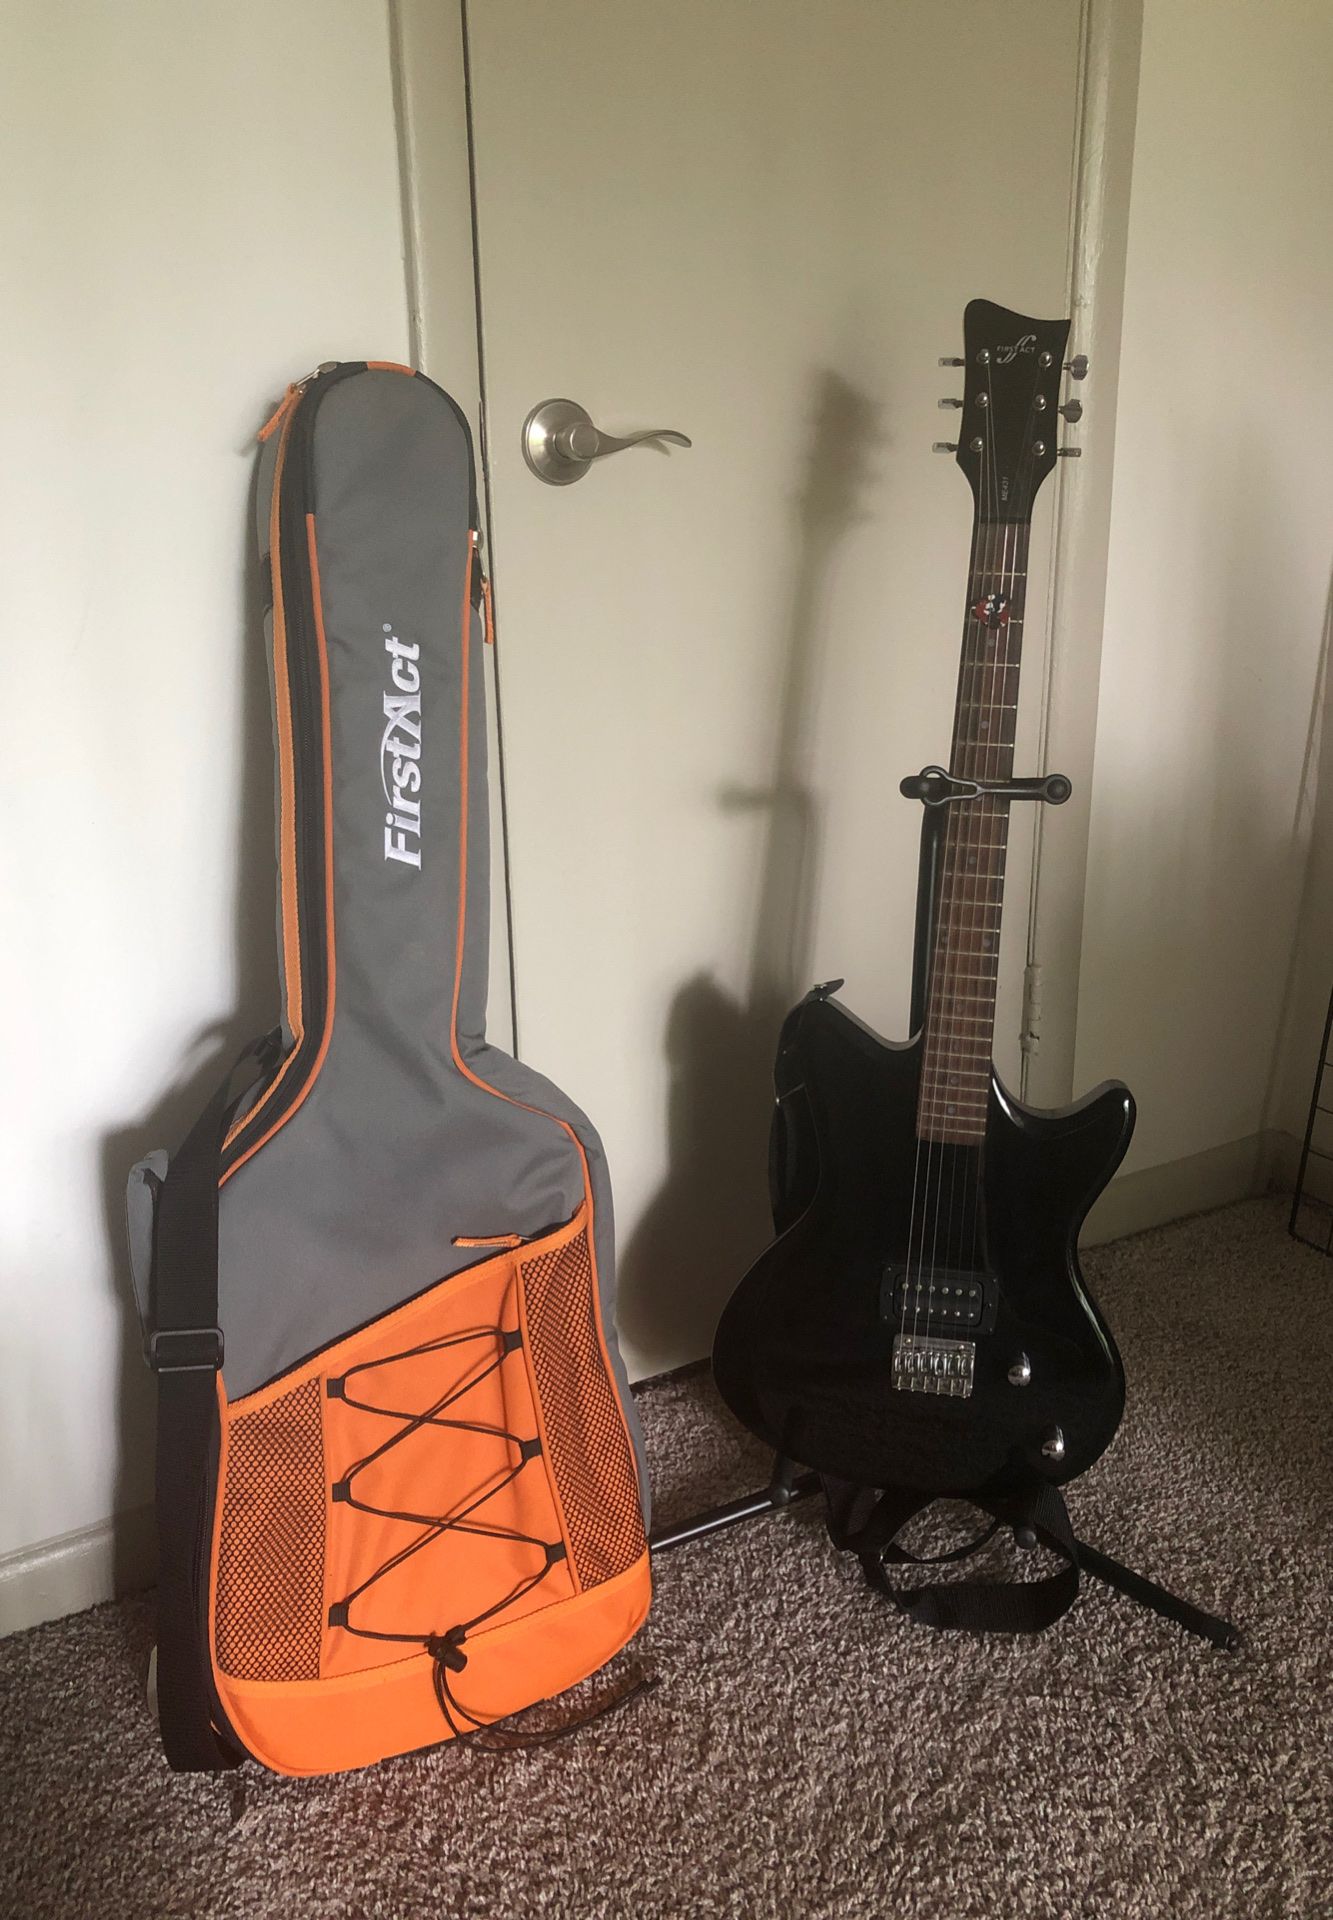 Guitar, Stand, and Case